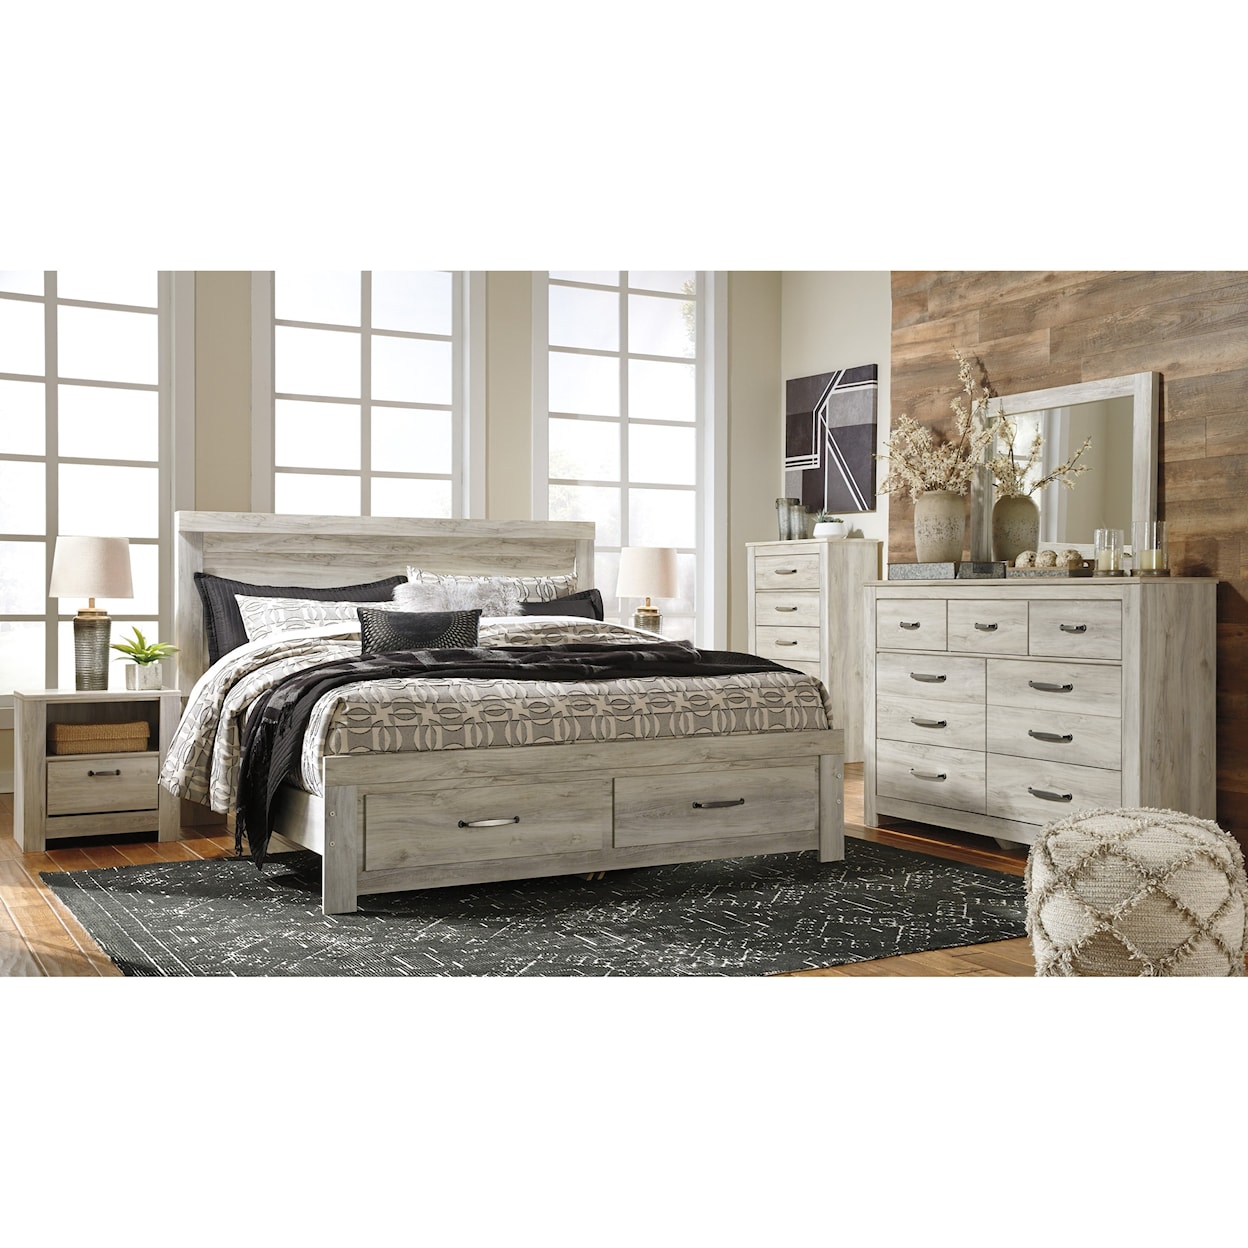 Ashley Signature Design Bellaby King Bedroom Group